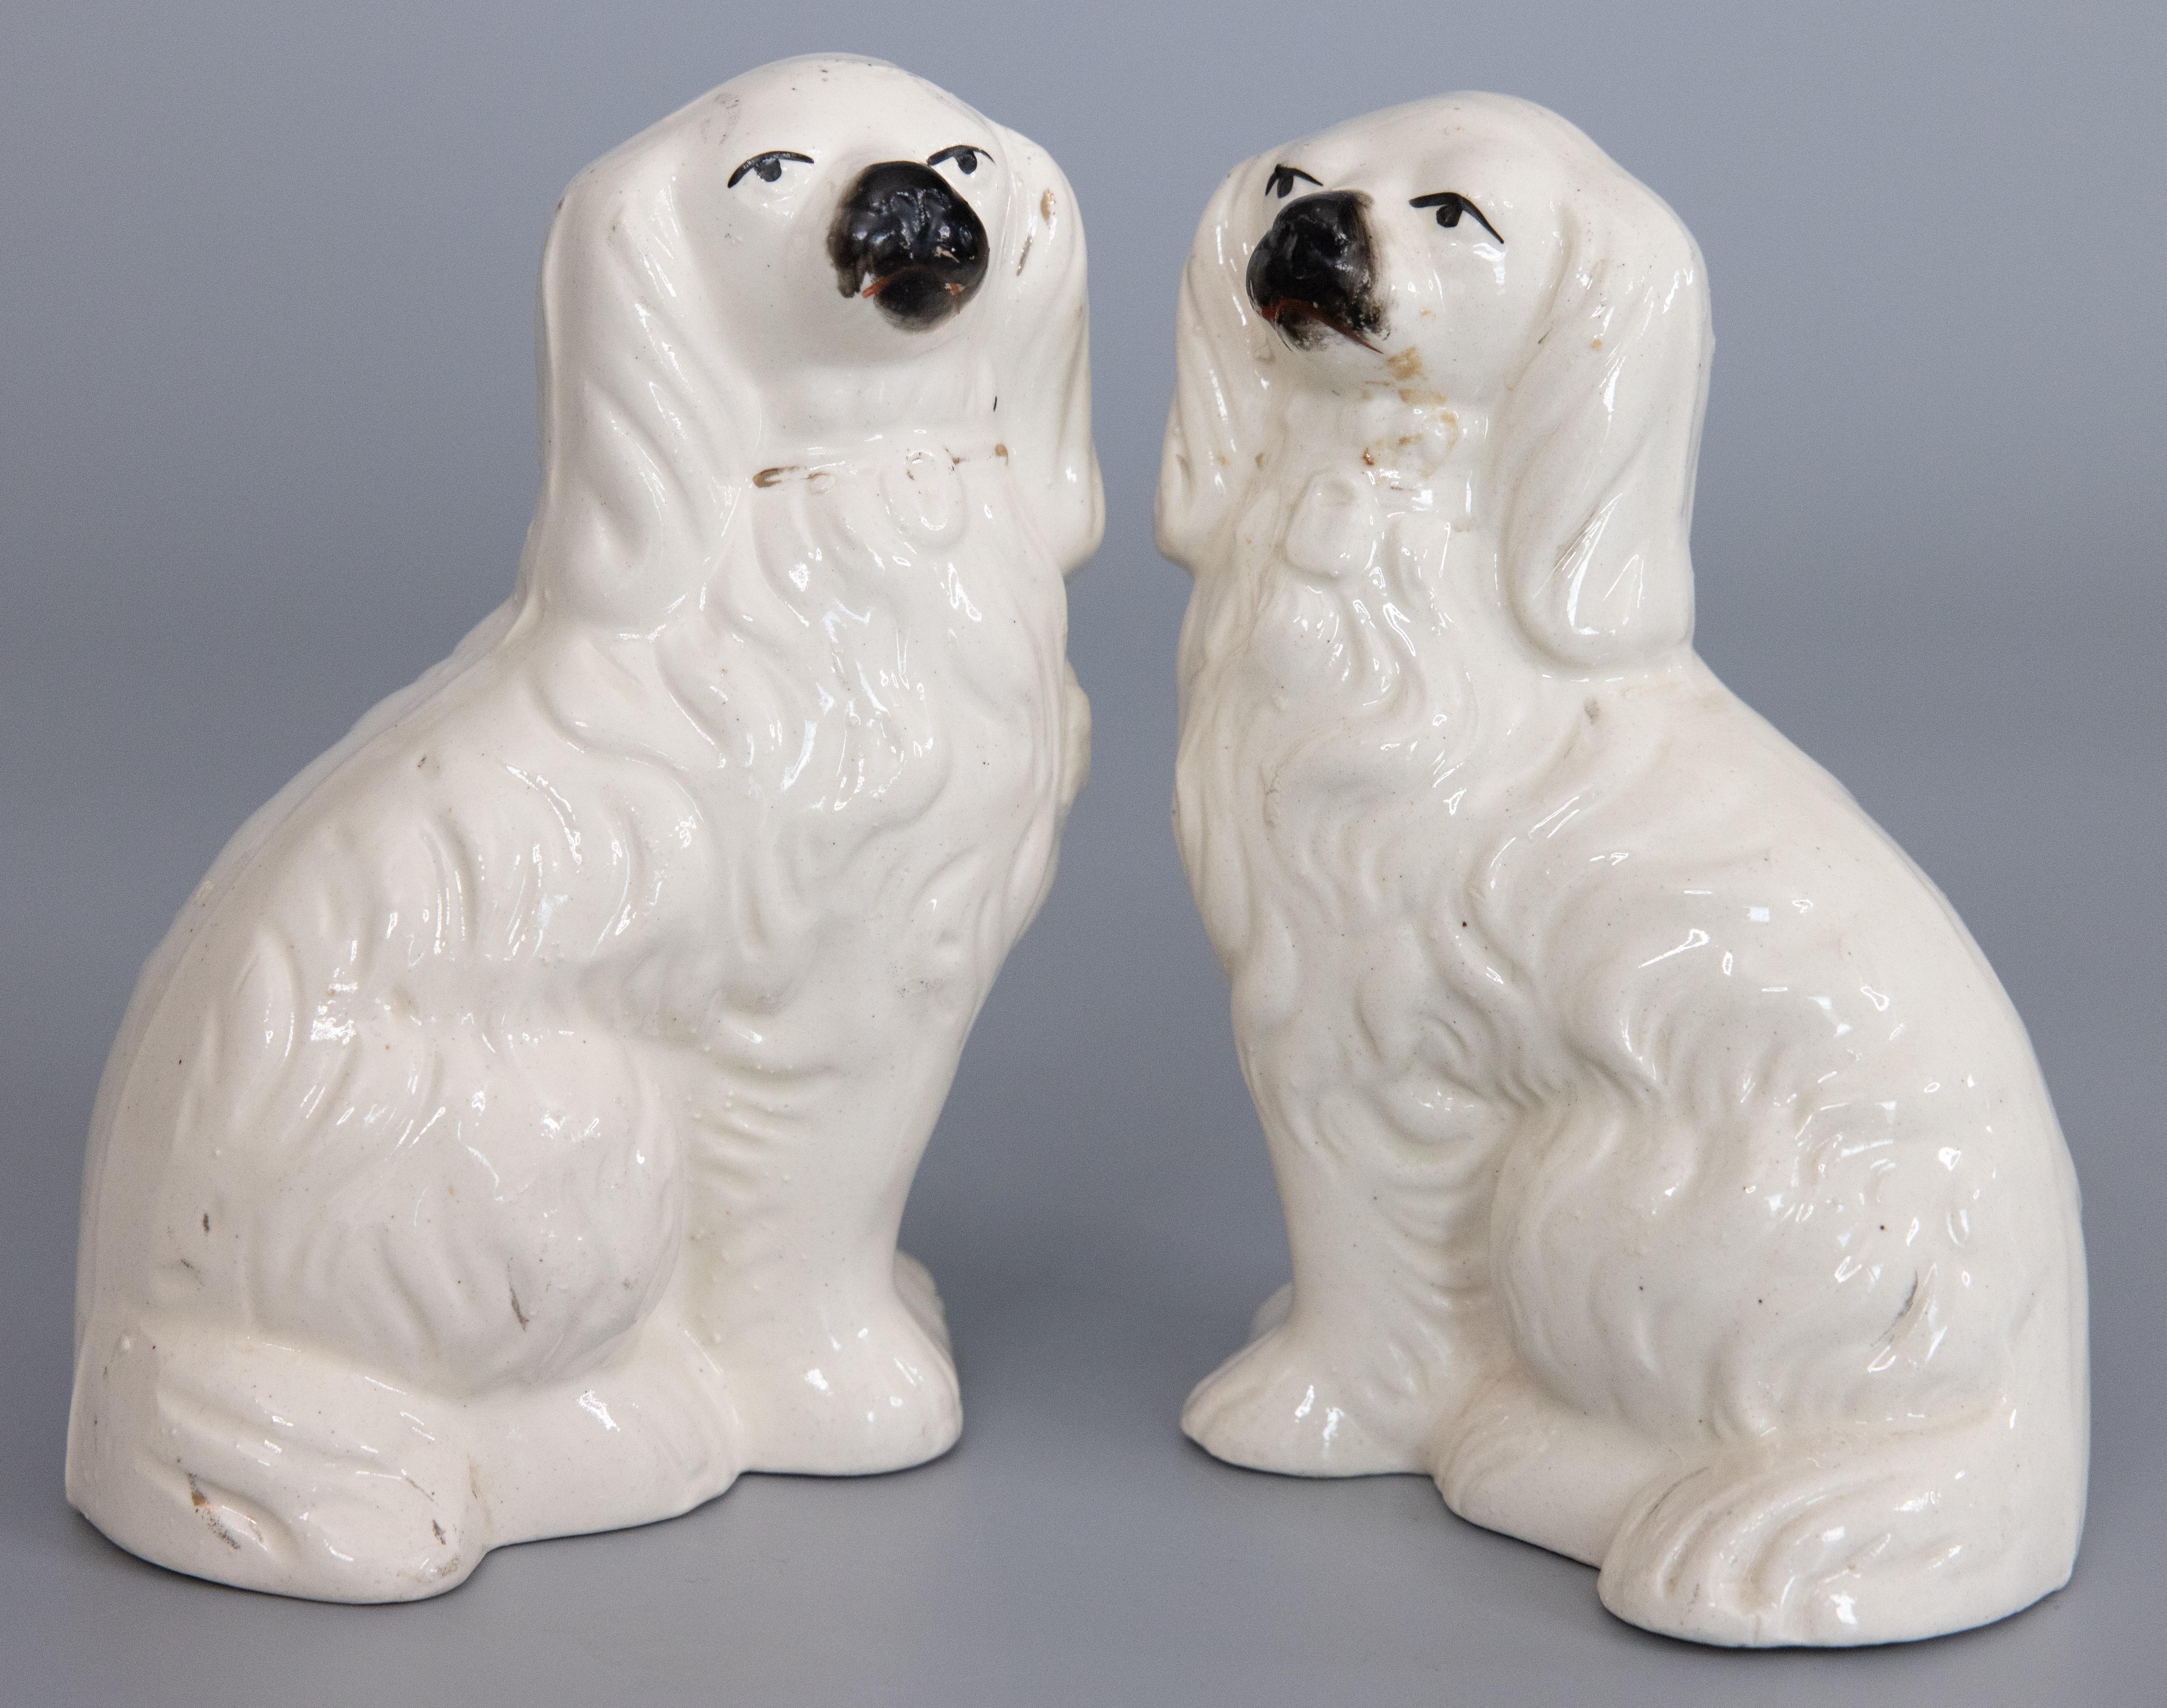 A fine pair of antique 19th-century English Staffordshire spaniel dogs. These charming dogs are hand painted with lovely details and sweet faces. It's hard not to be smitten! They are the perfect Victorian pair of dogs for your home and would make a